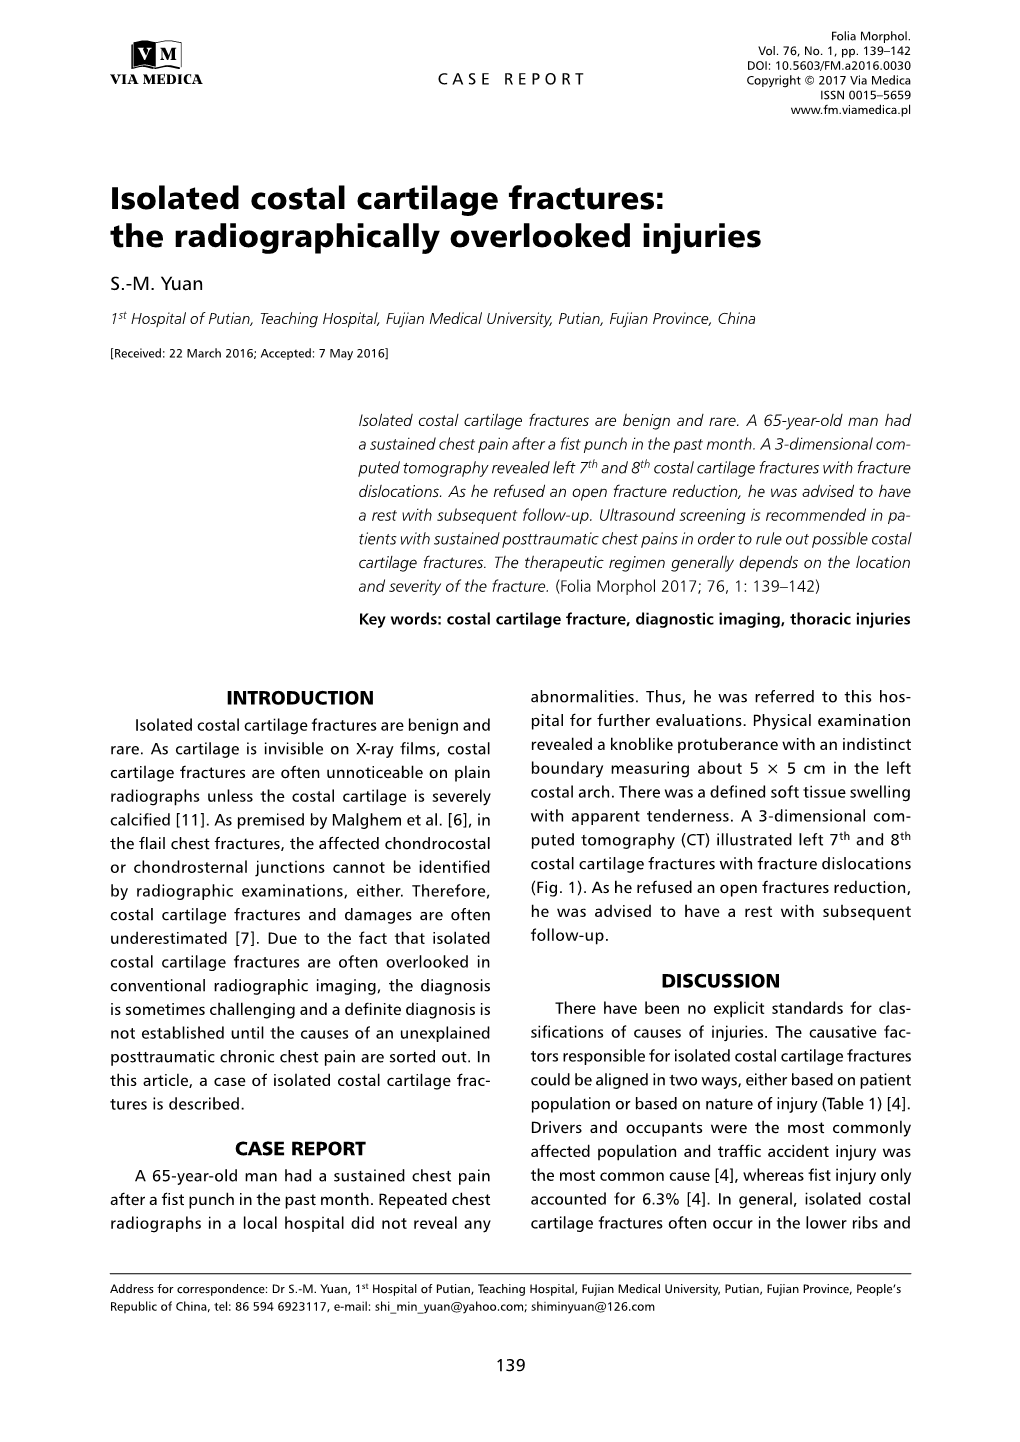 Isolated Costal Cartilage Fractures: the Radiographically Overlooked Injuries S.-M